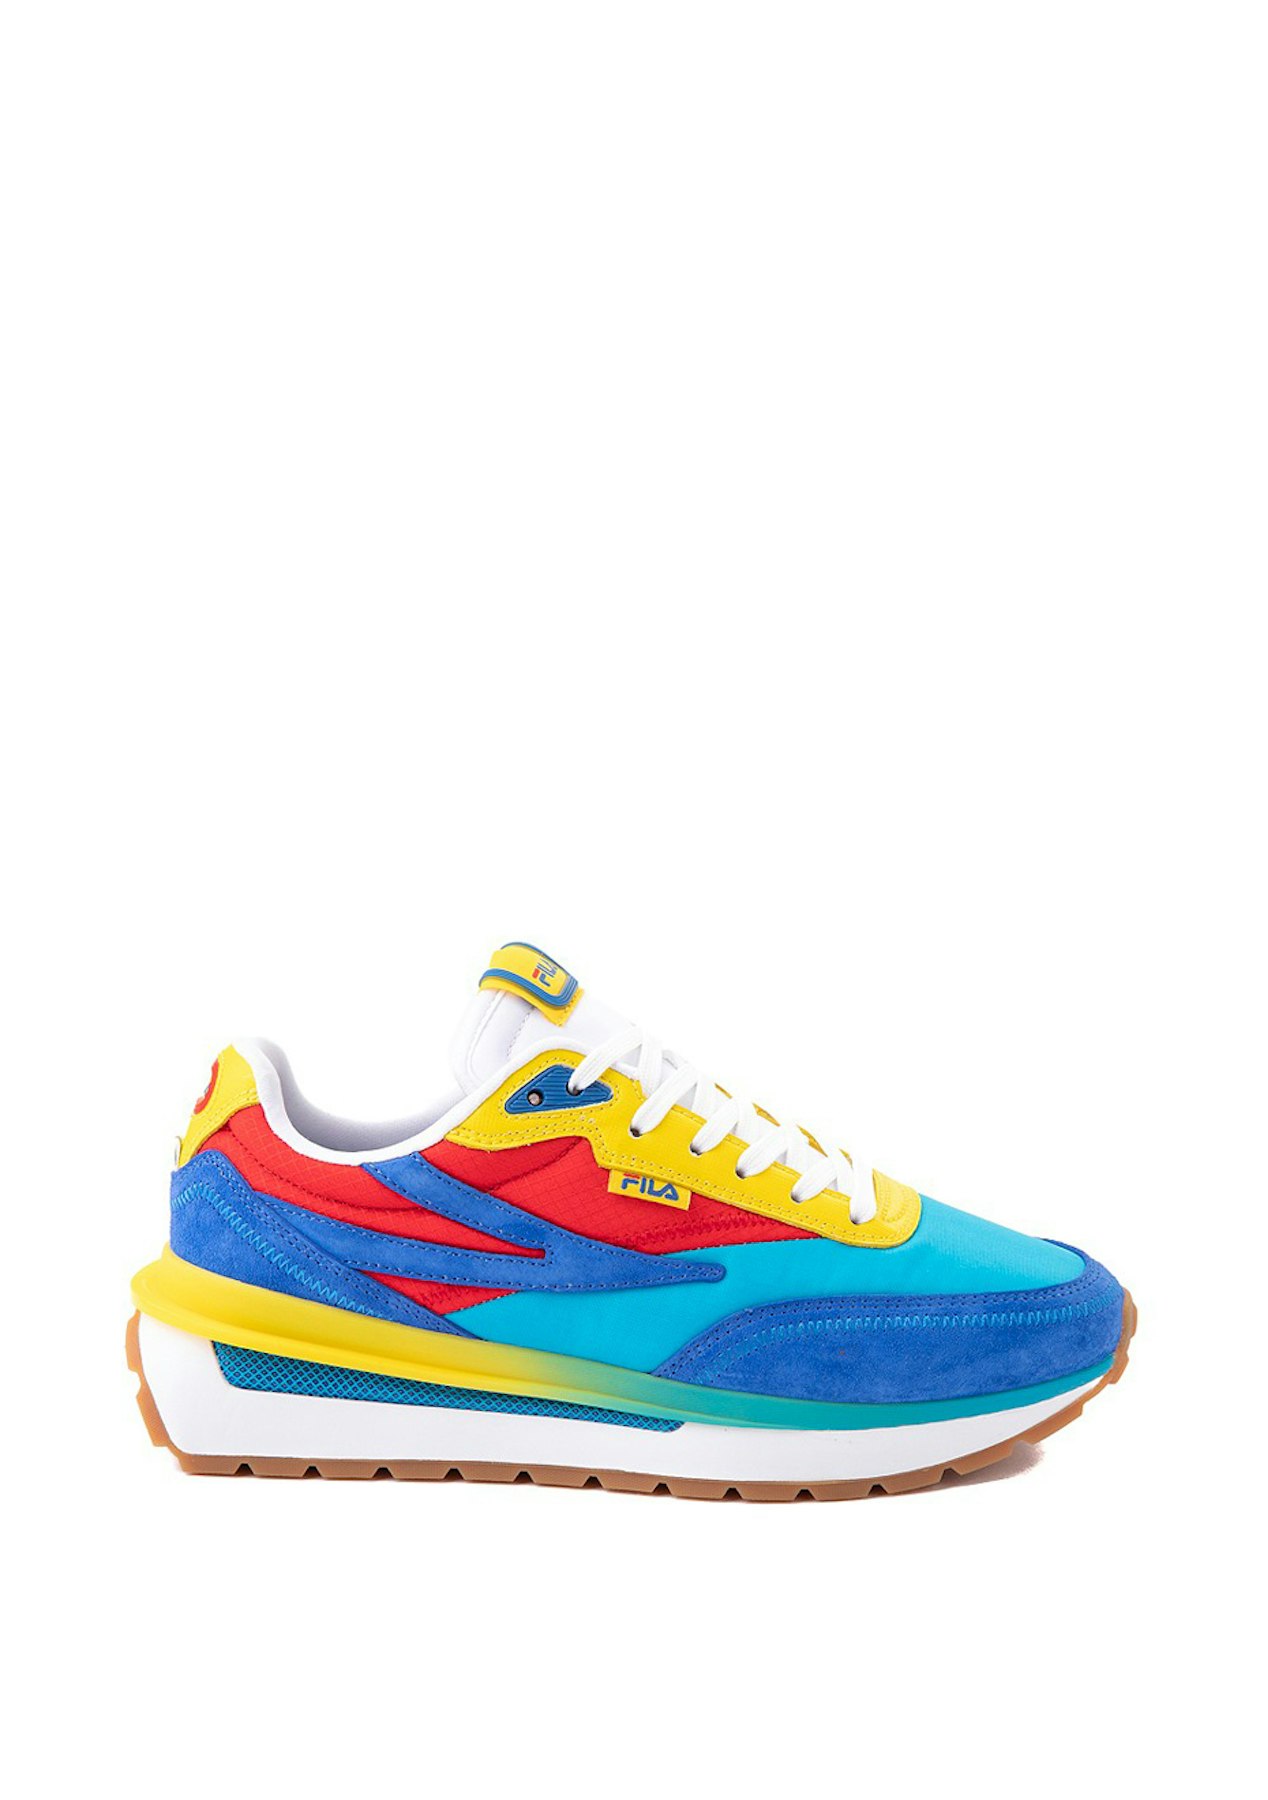 Fila Unisex Reno Sneakers Blue/Yellow/Red Onceit